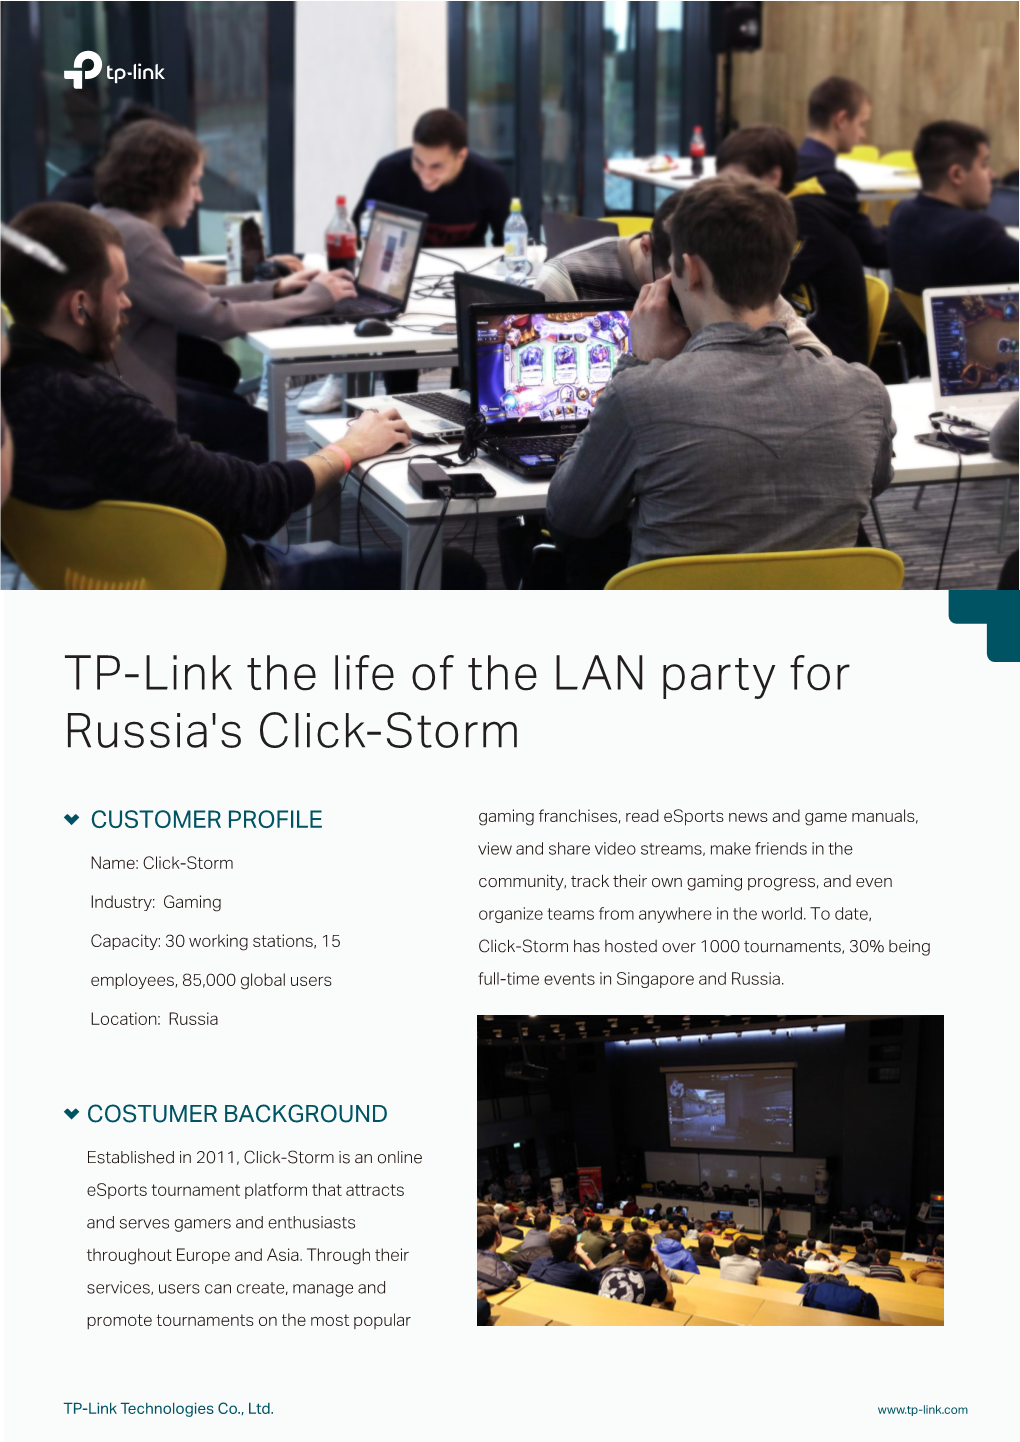 TP-Link the Life of the LAN Party for Russia's Click-Storm